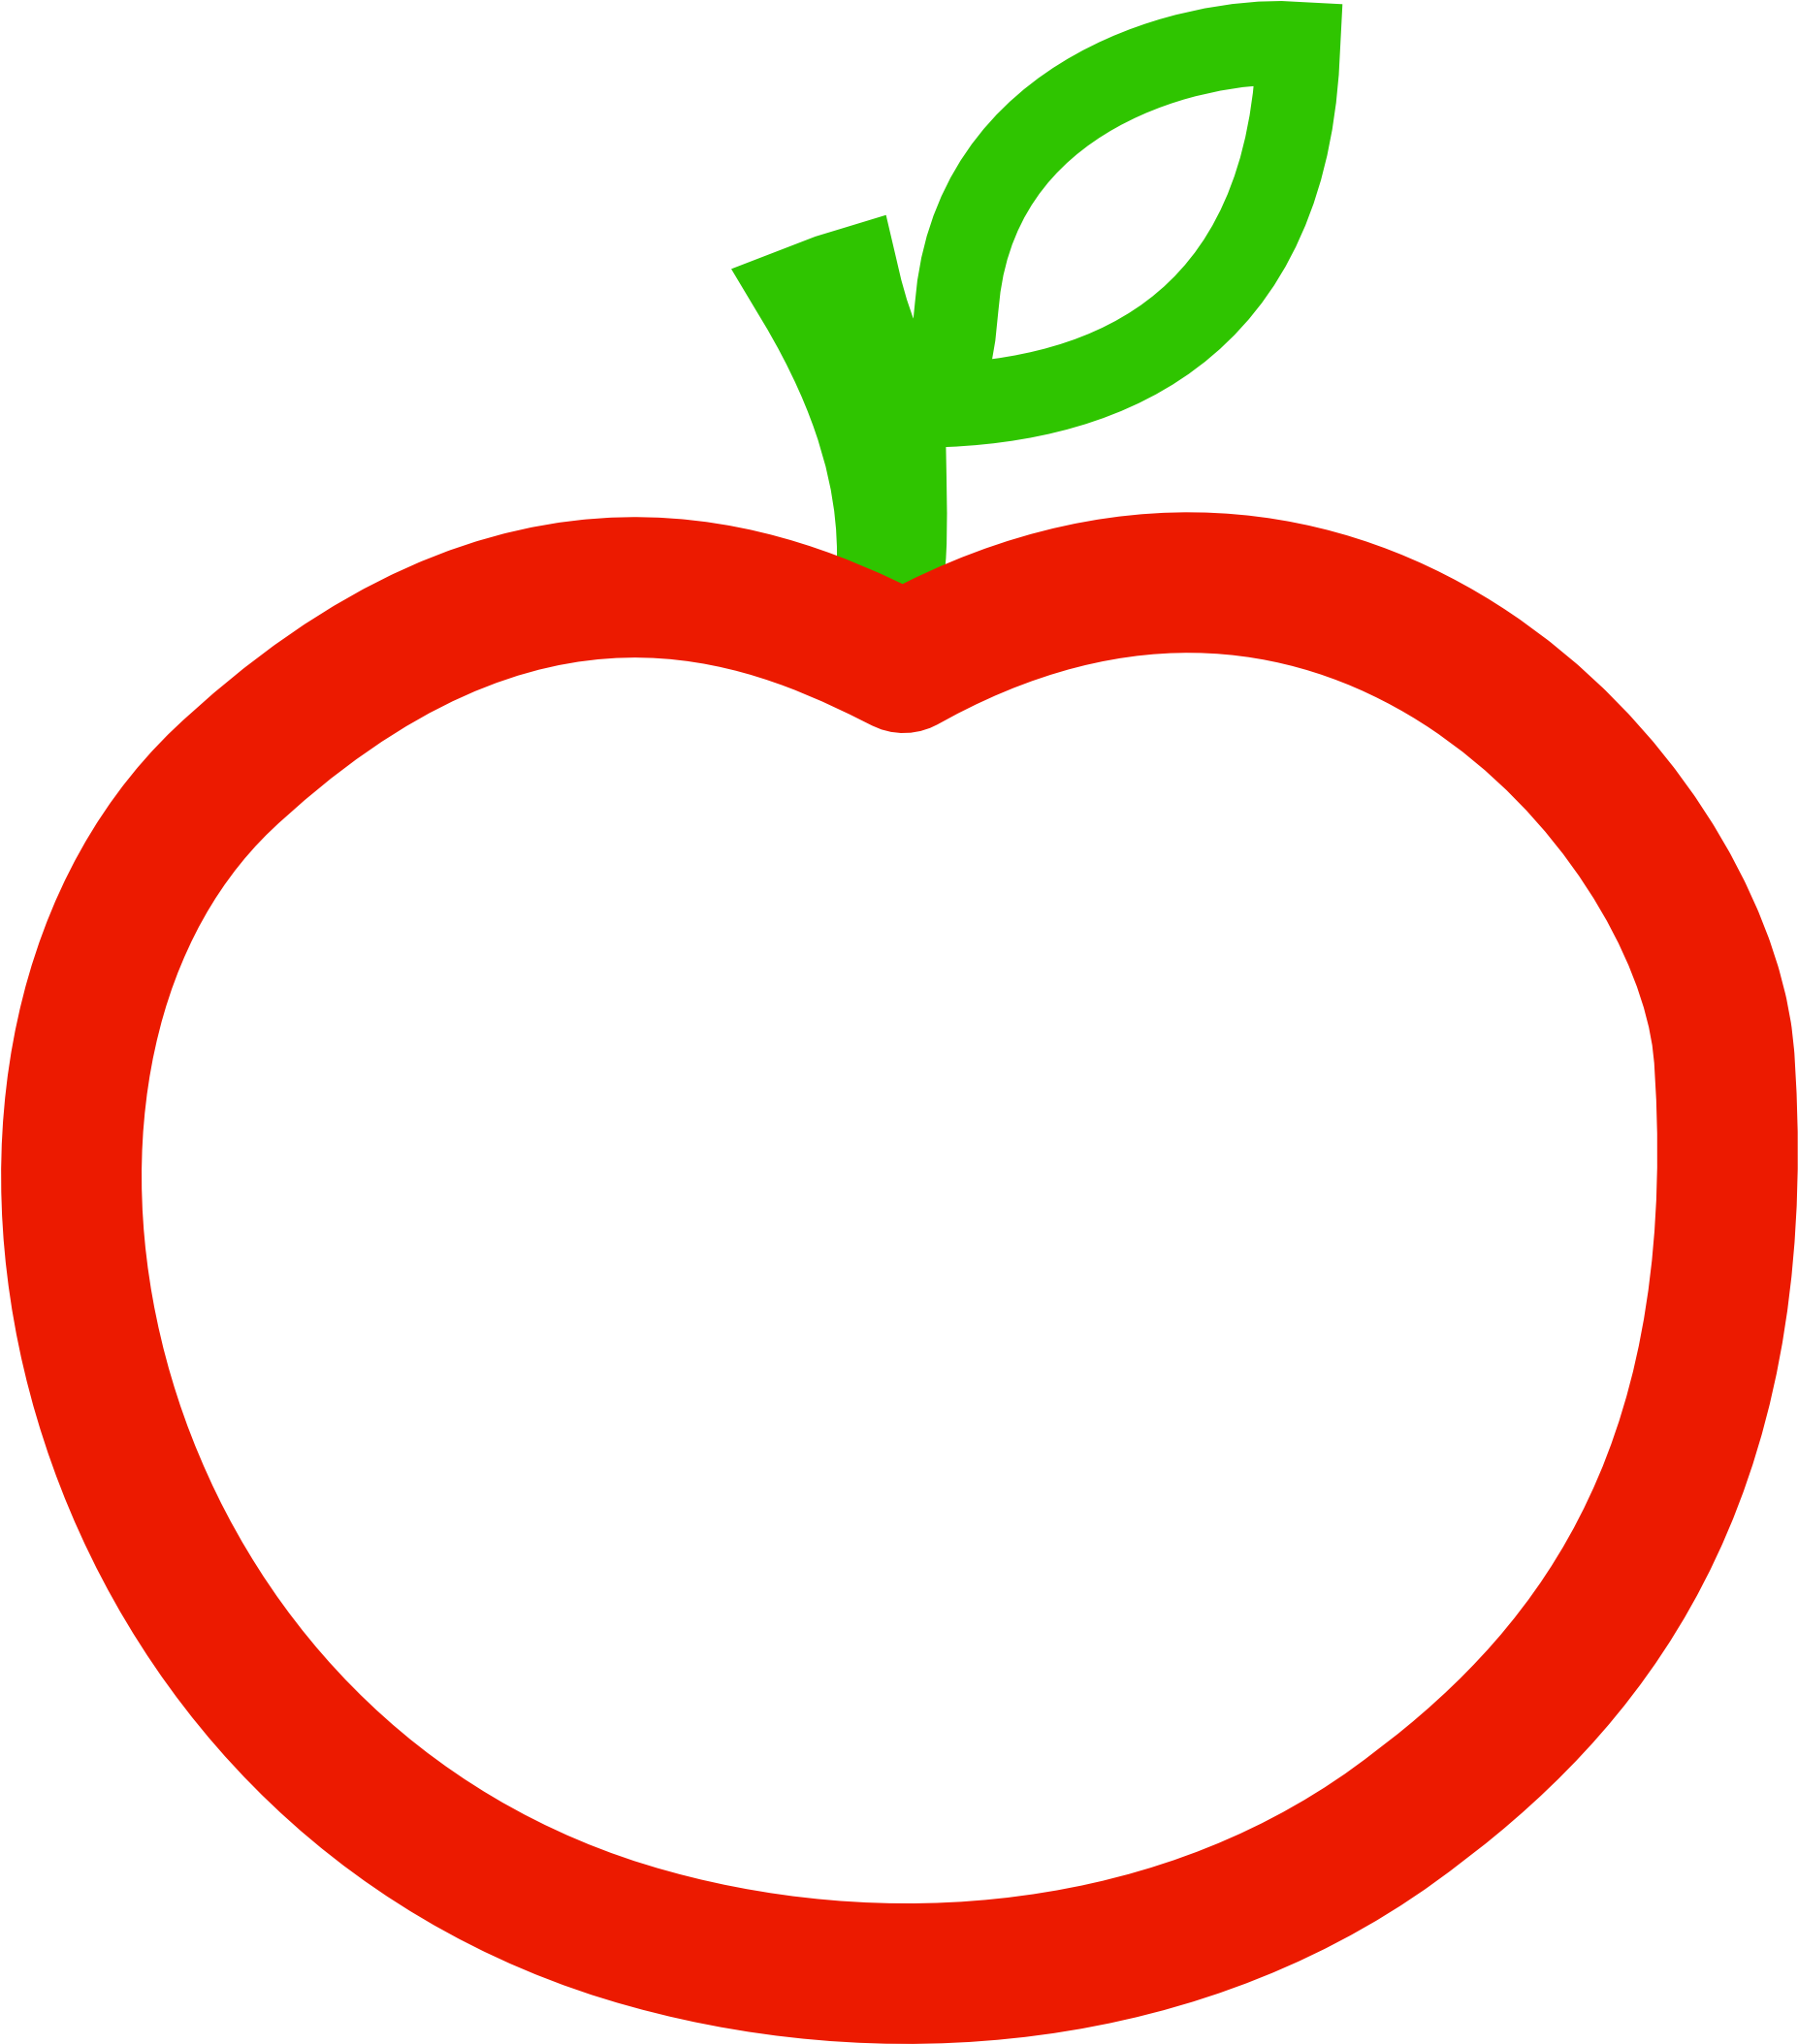 Stylized Red Apple Graphic PNG image